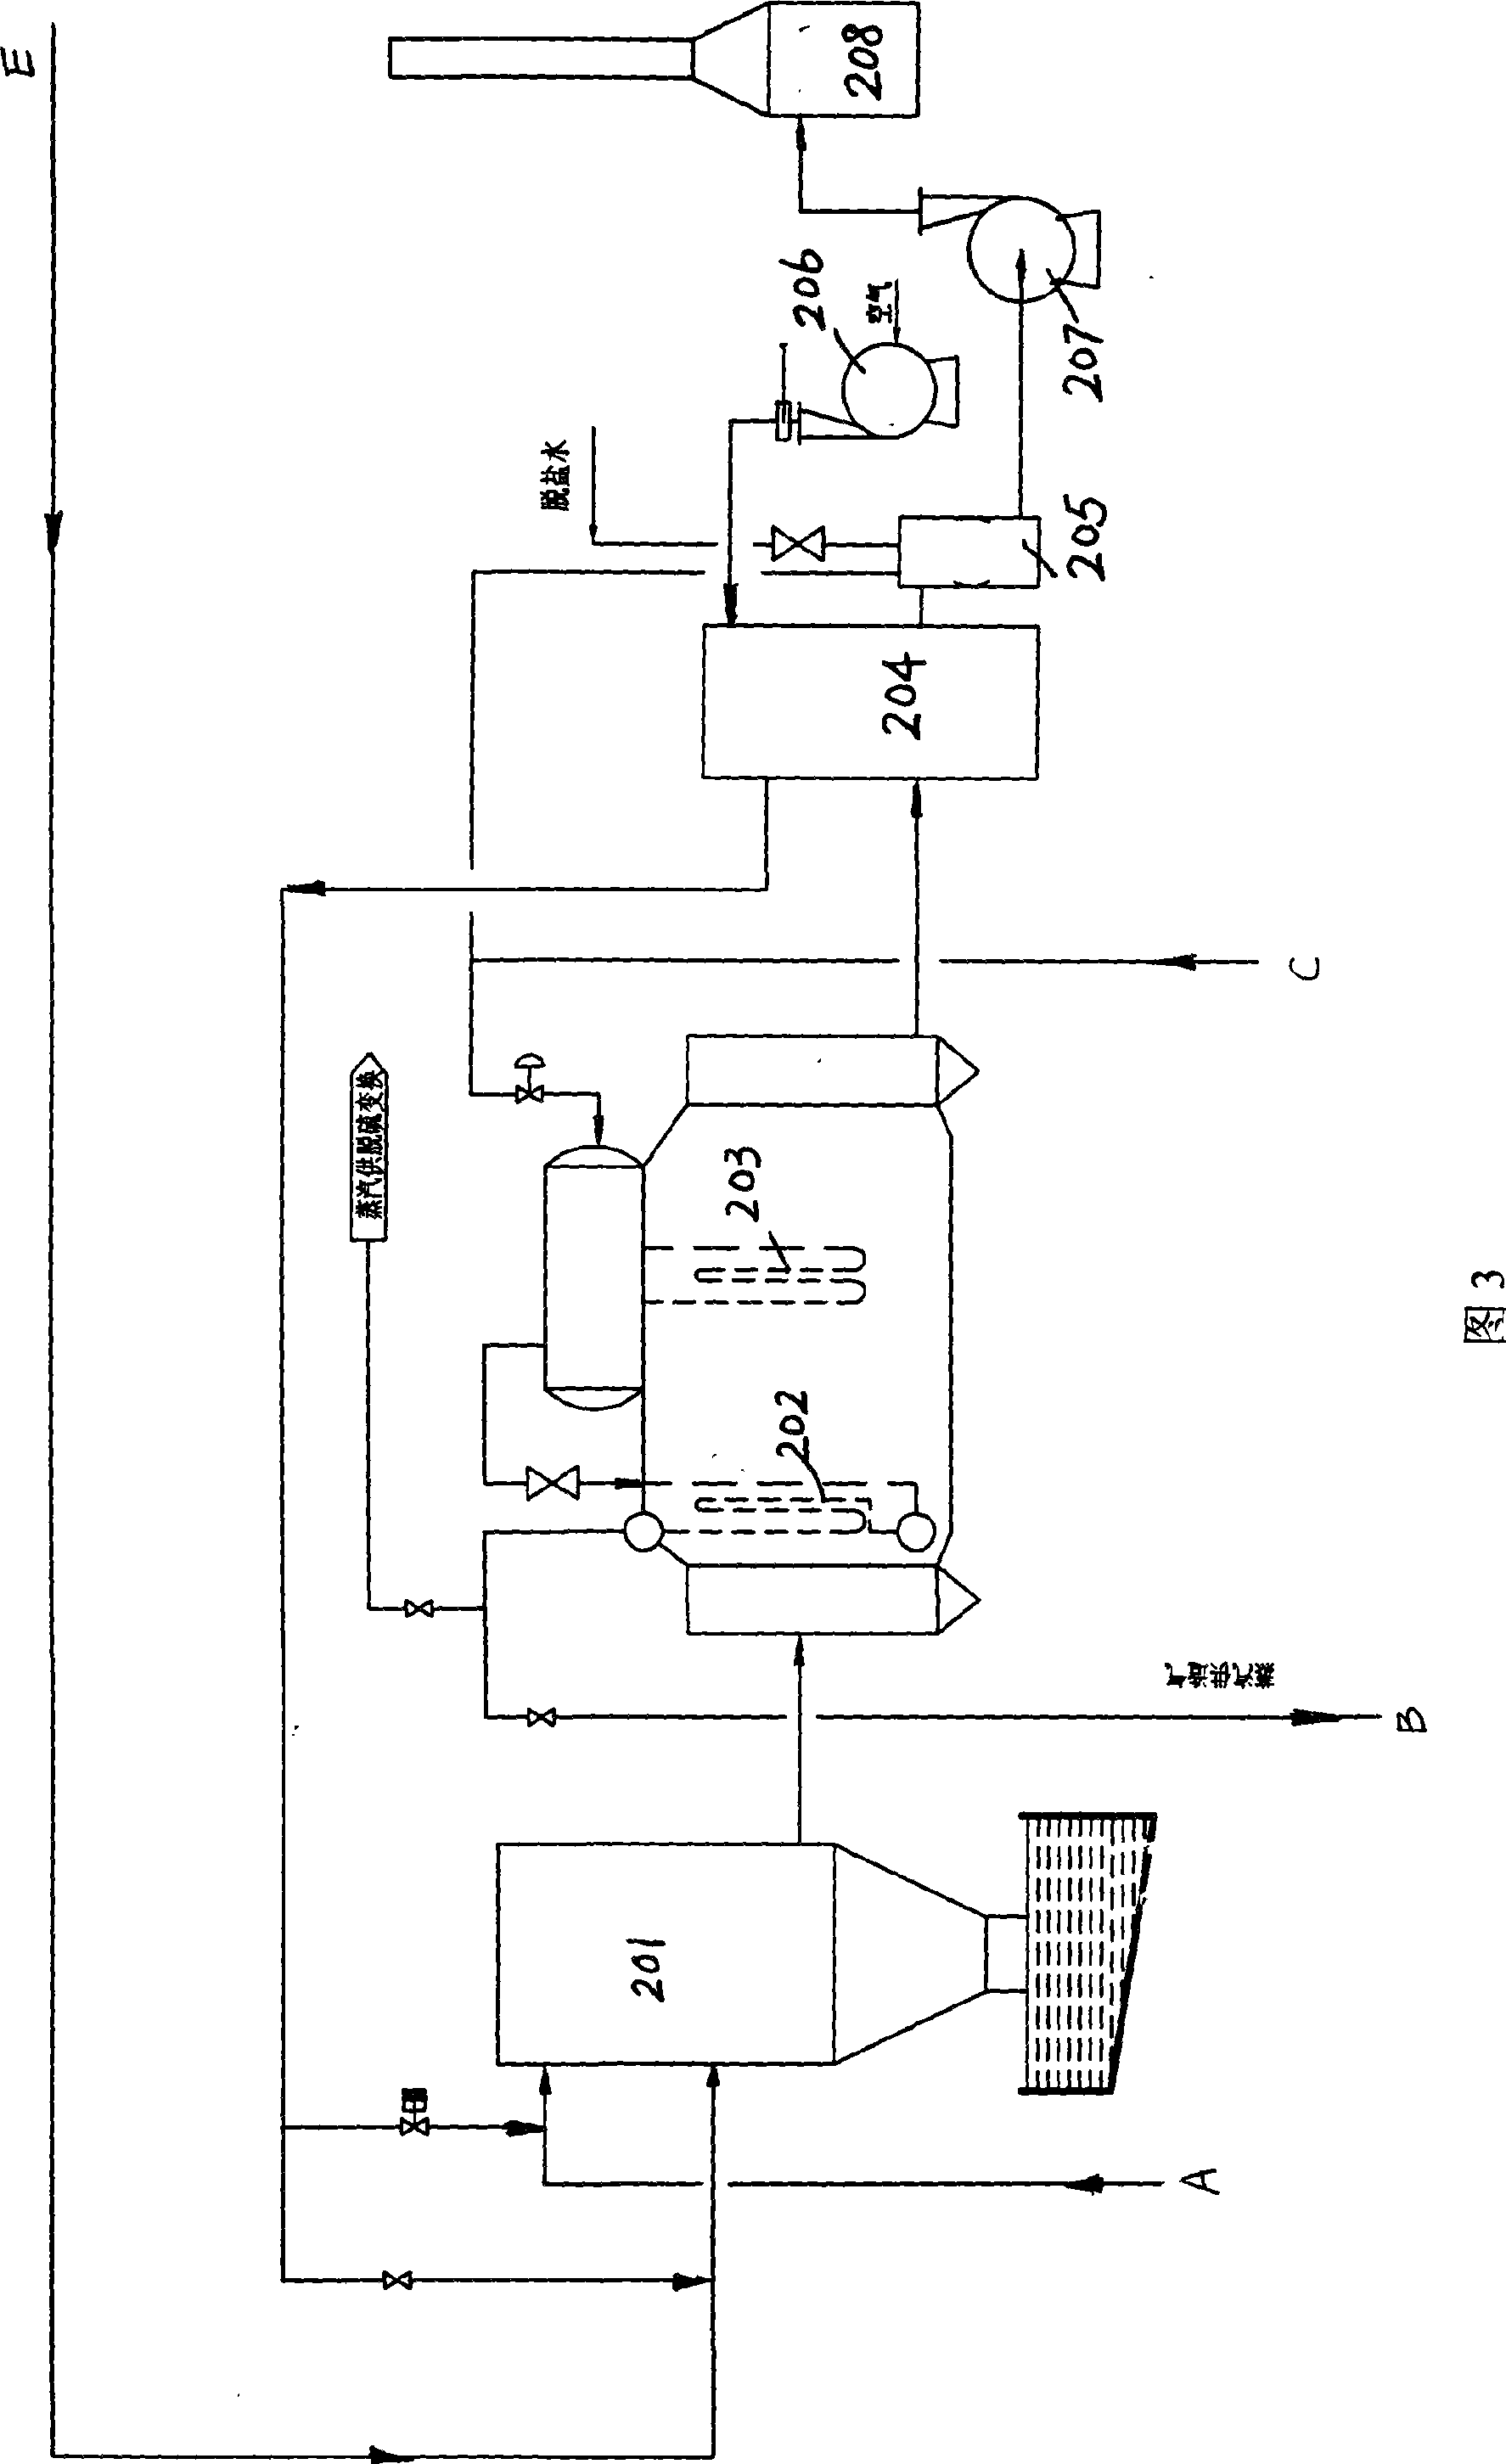 Small-sized coal gasification hydrogen making method